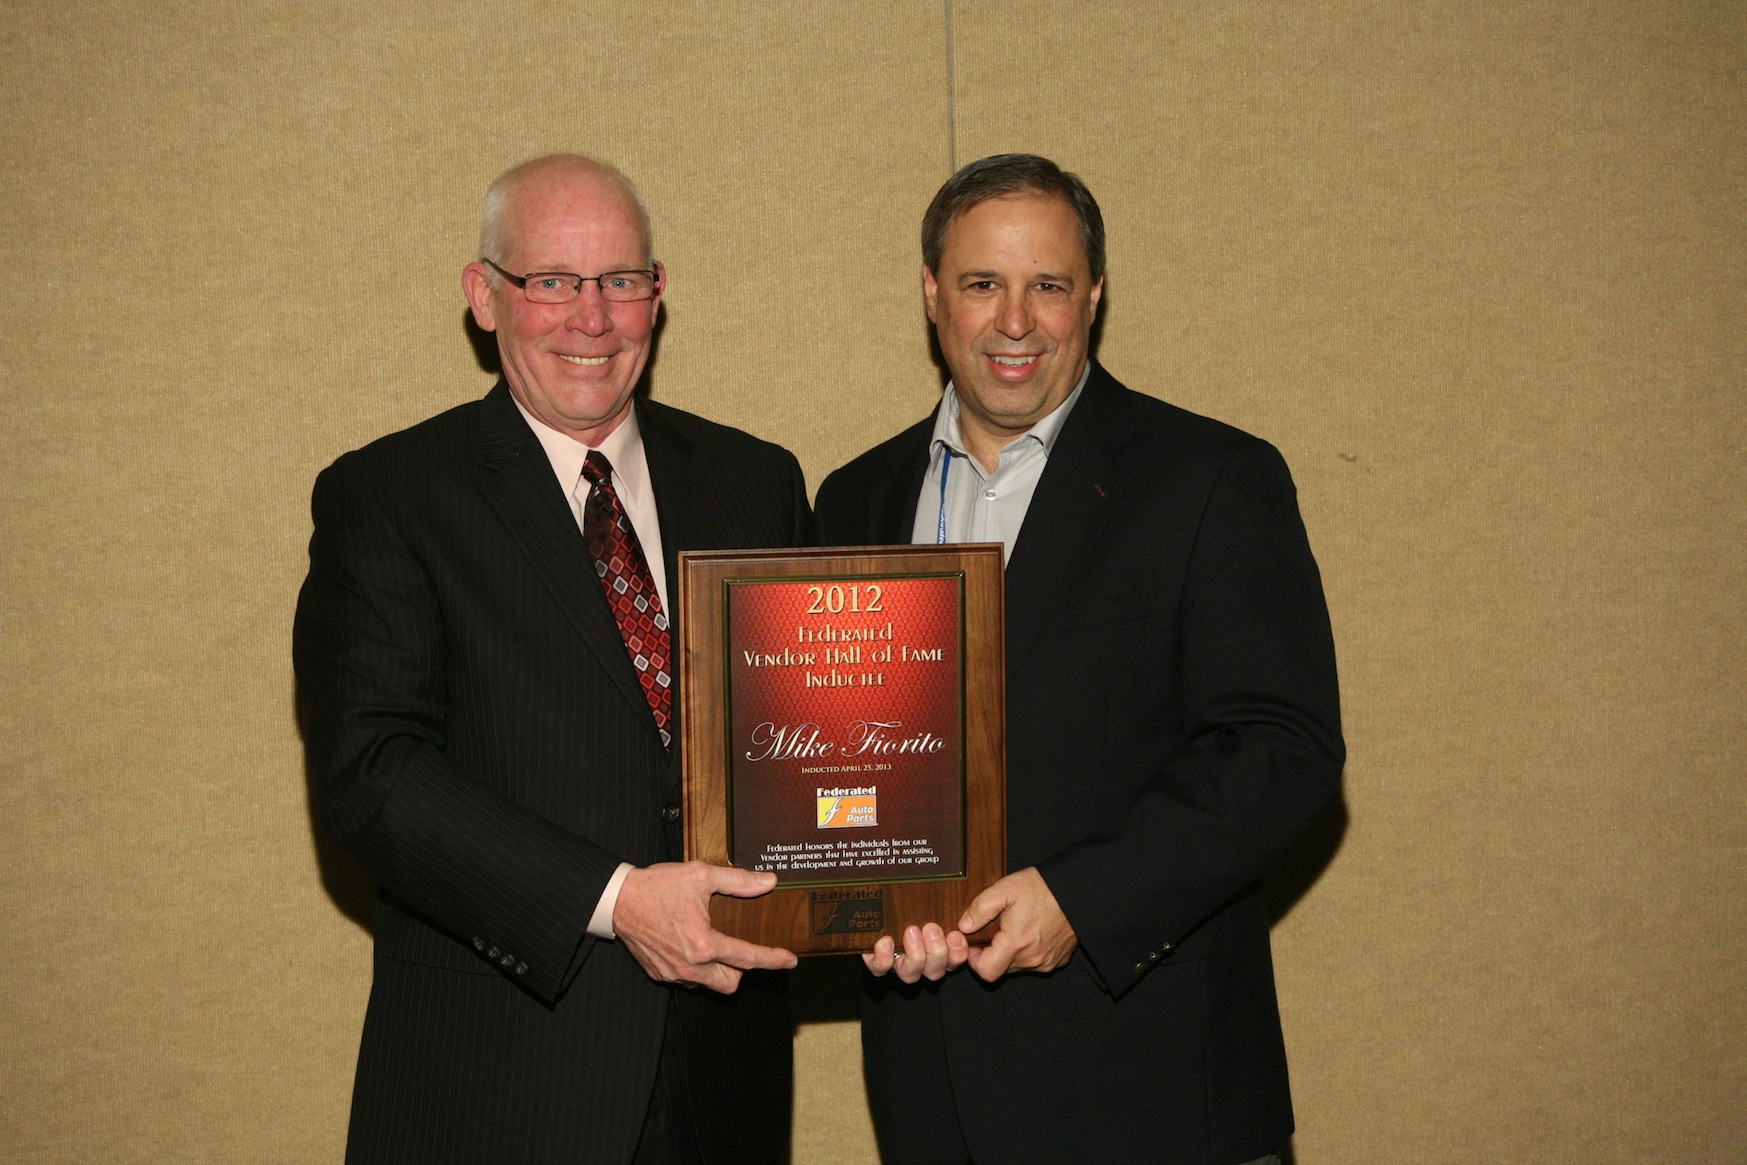 From left, Larry Pavey, president of Federated Auto Parts and Mike Fiorito.